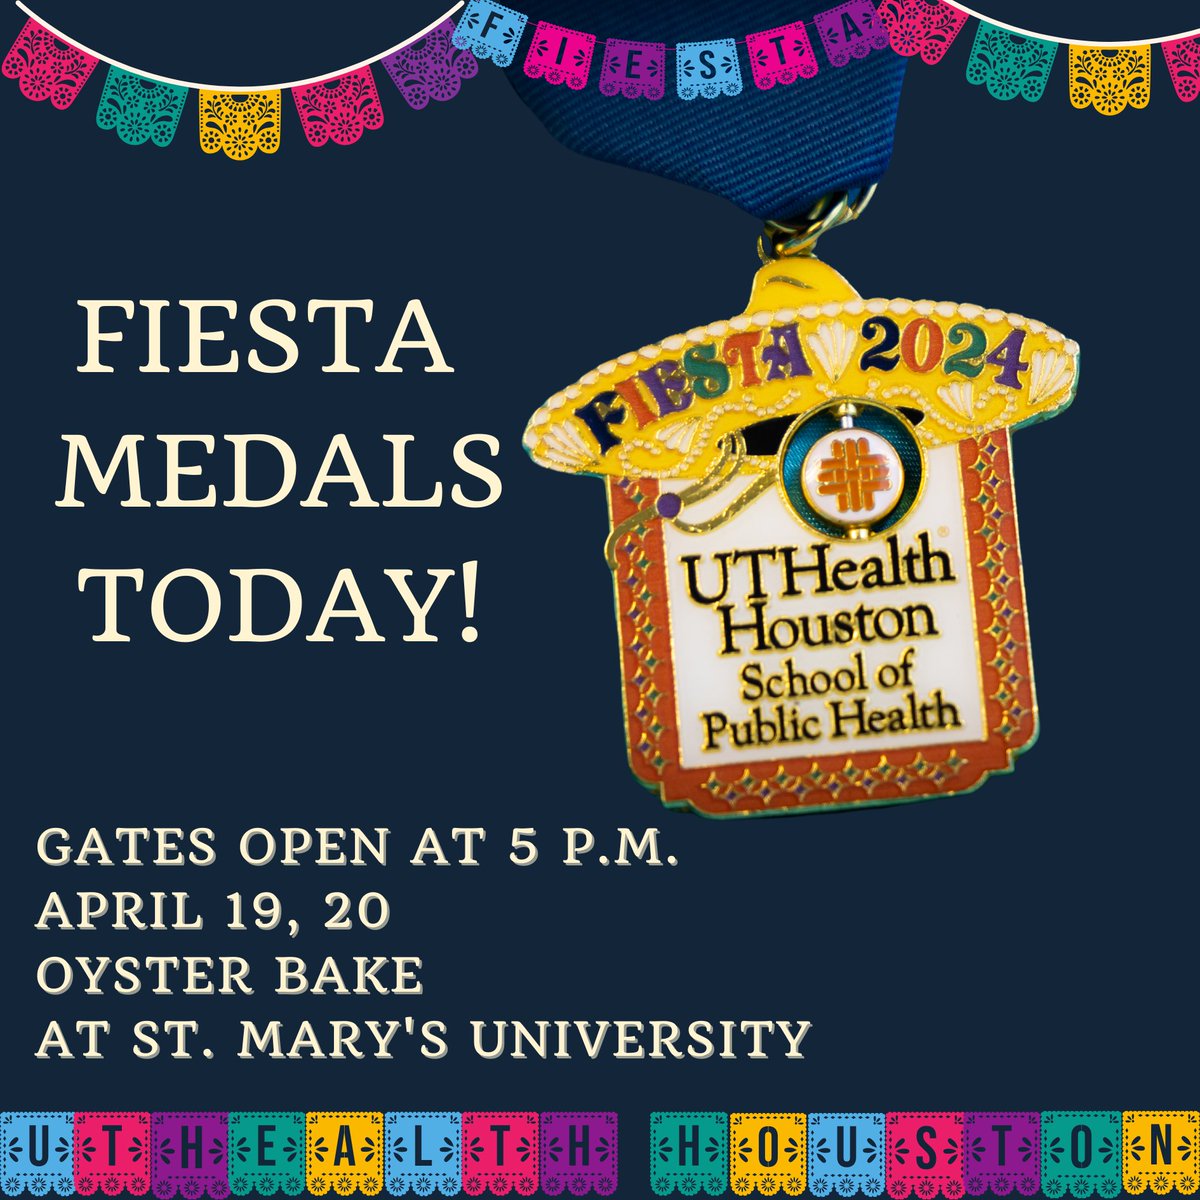 It's HERE! Fiesta's kick-off event has arrived and we are ready and waiting to meet you all at our booth, where we will have Fiesta medals you can win! And lots of cool swag if you don't win a medal. Come see us! @oysterbake @fiestasa @stmarysu #fiesta #fiestamedals